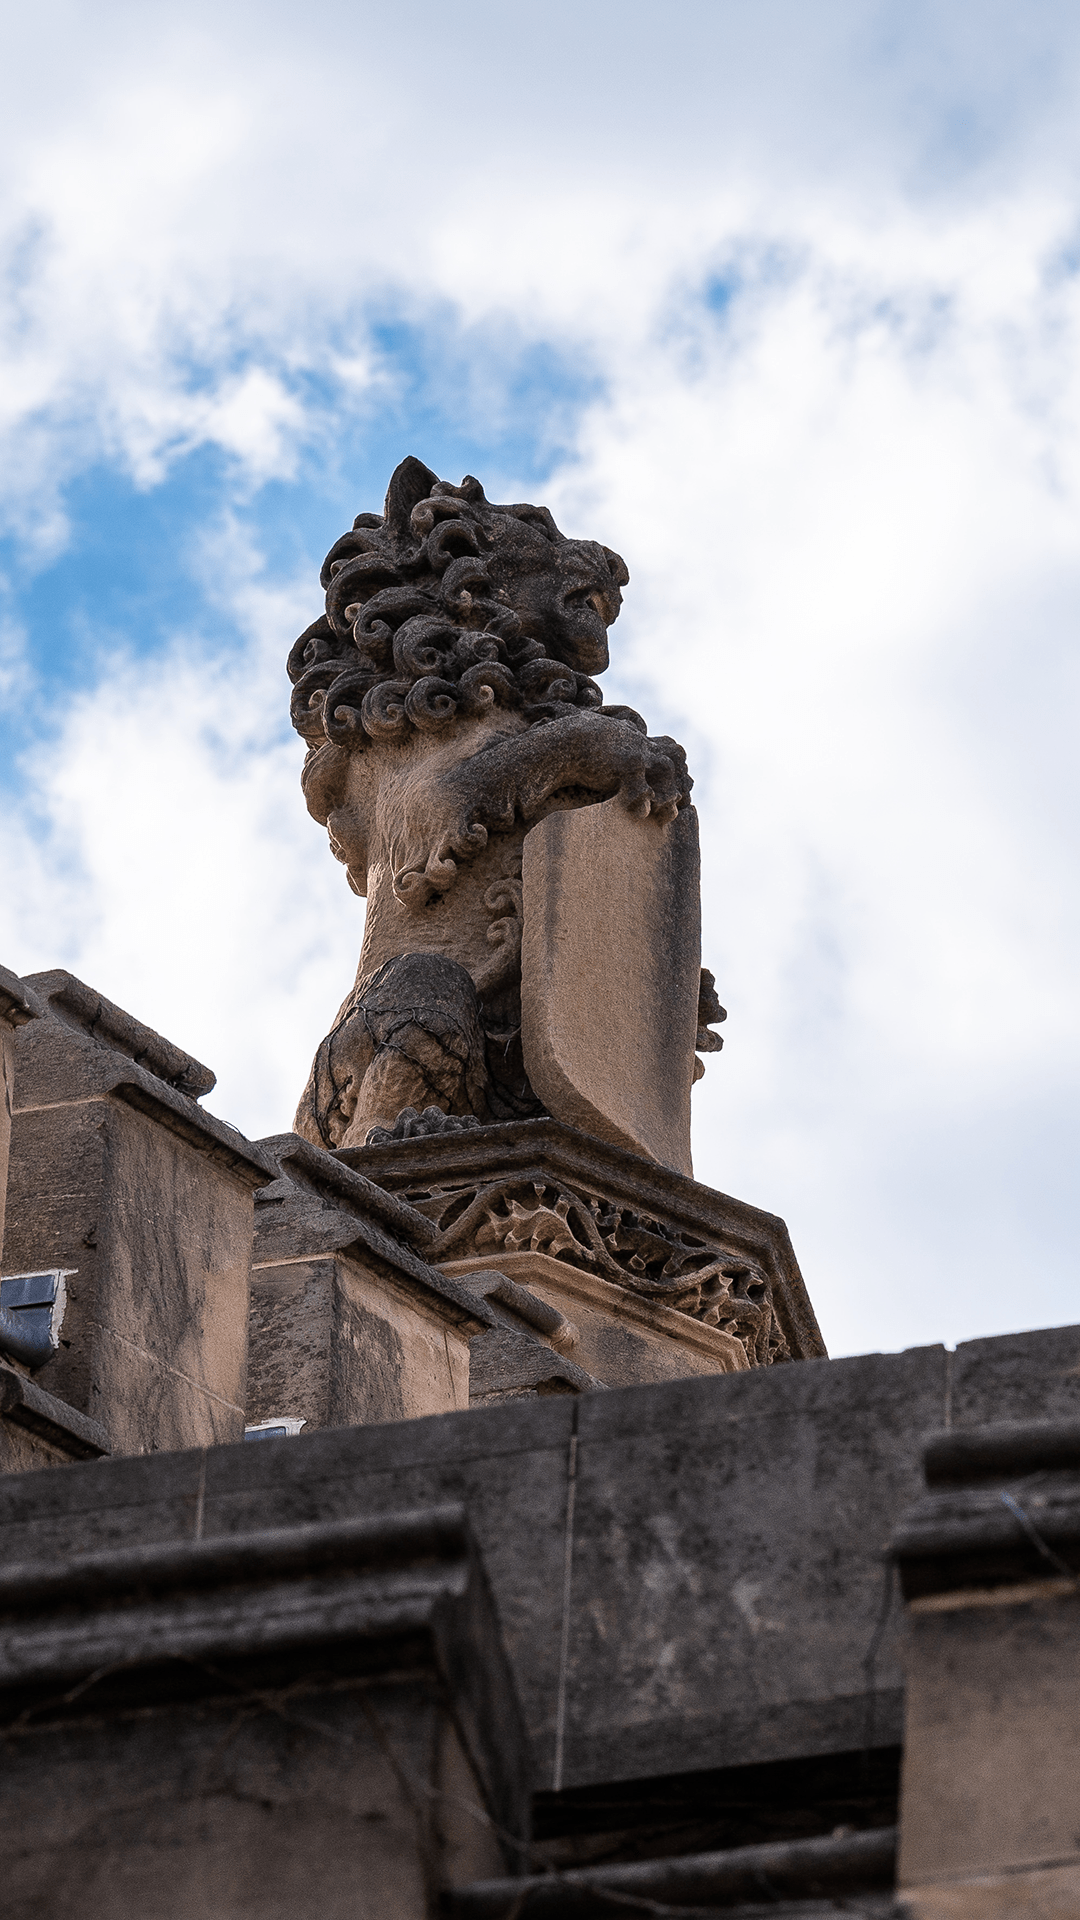 Stone lion carving atop a building against a blue sky with clouds